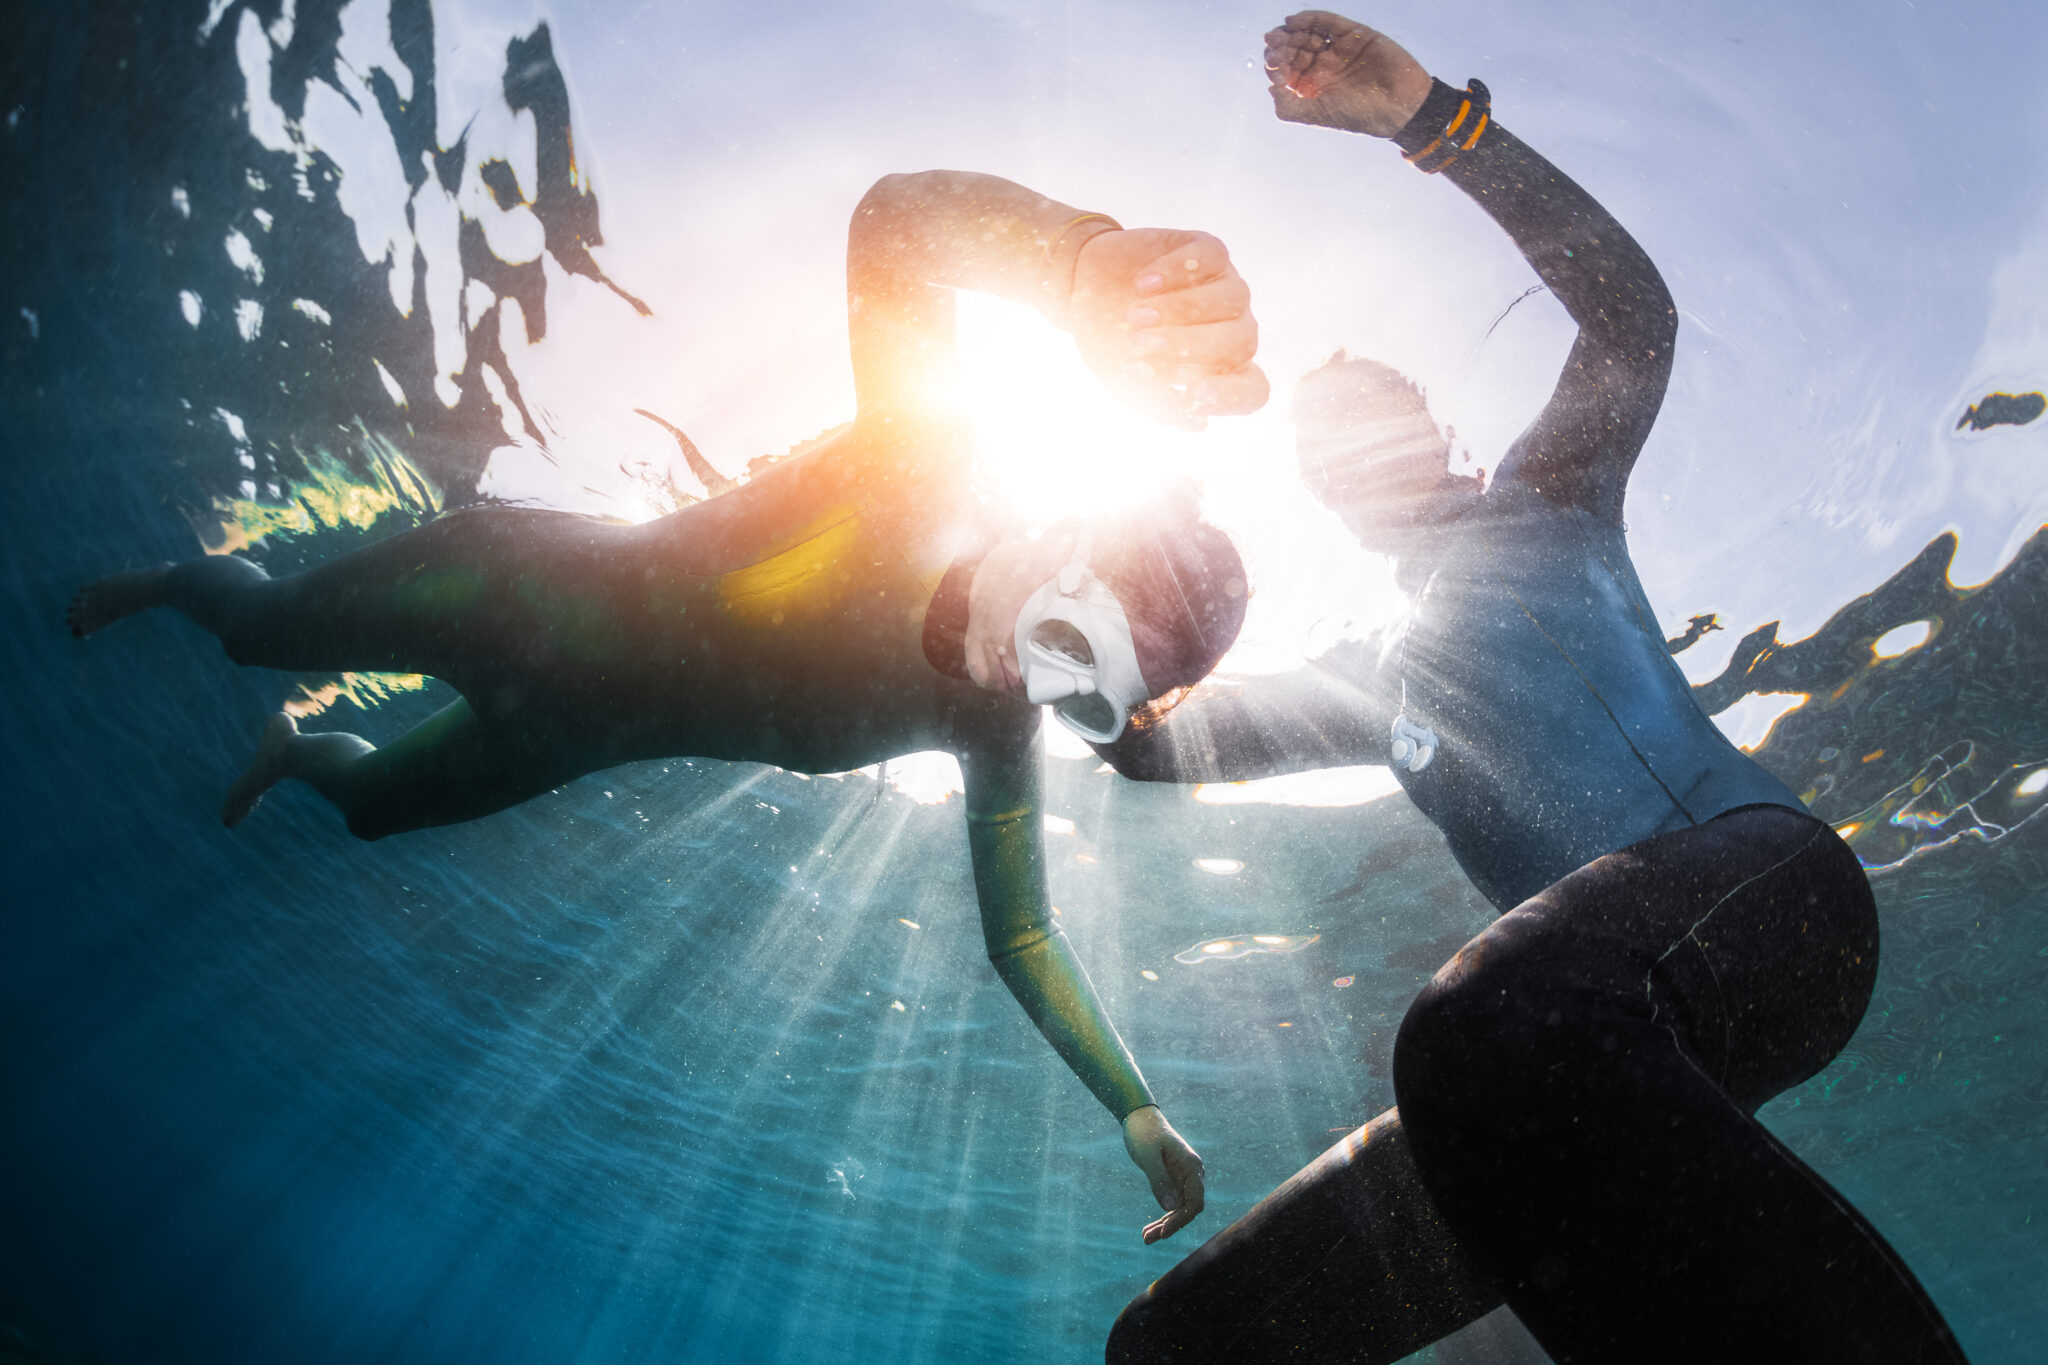 a diver practices static apnea breath hold freediving in shallow water with a trained buddy